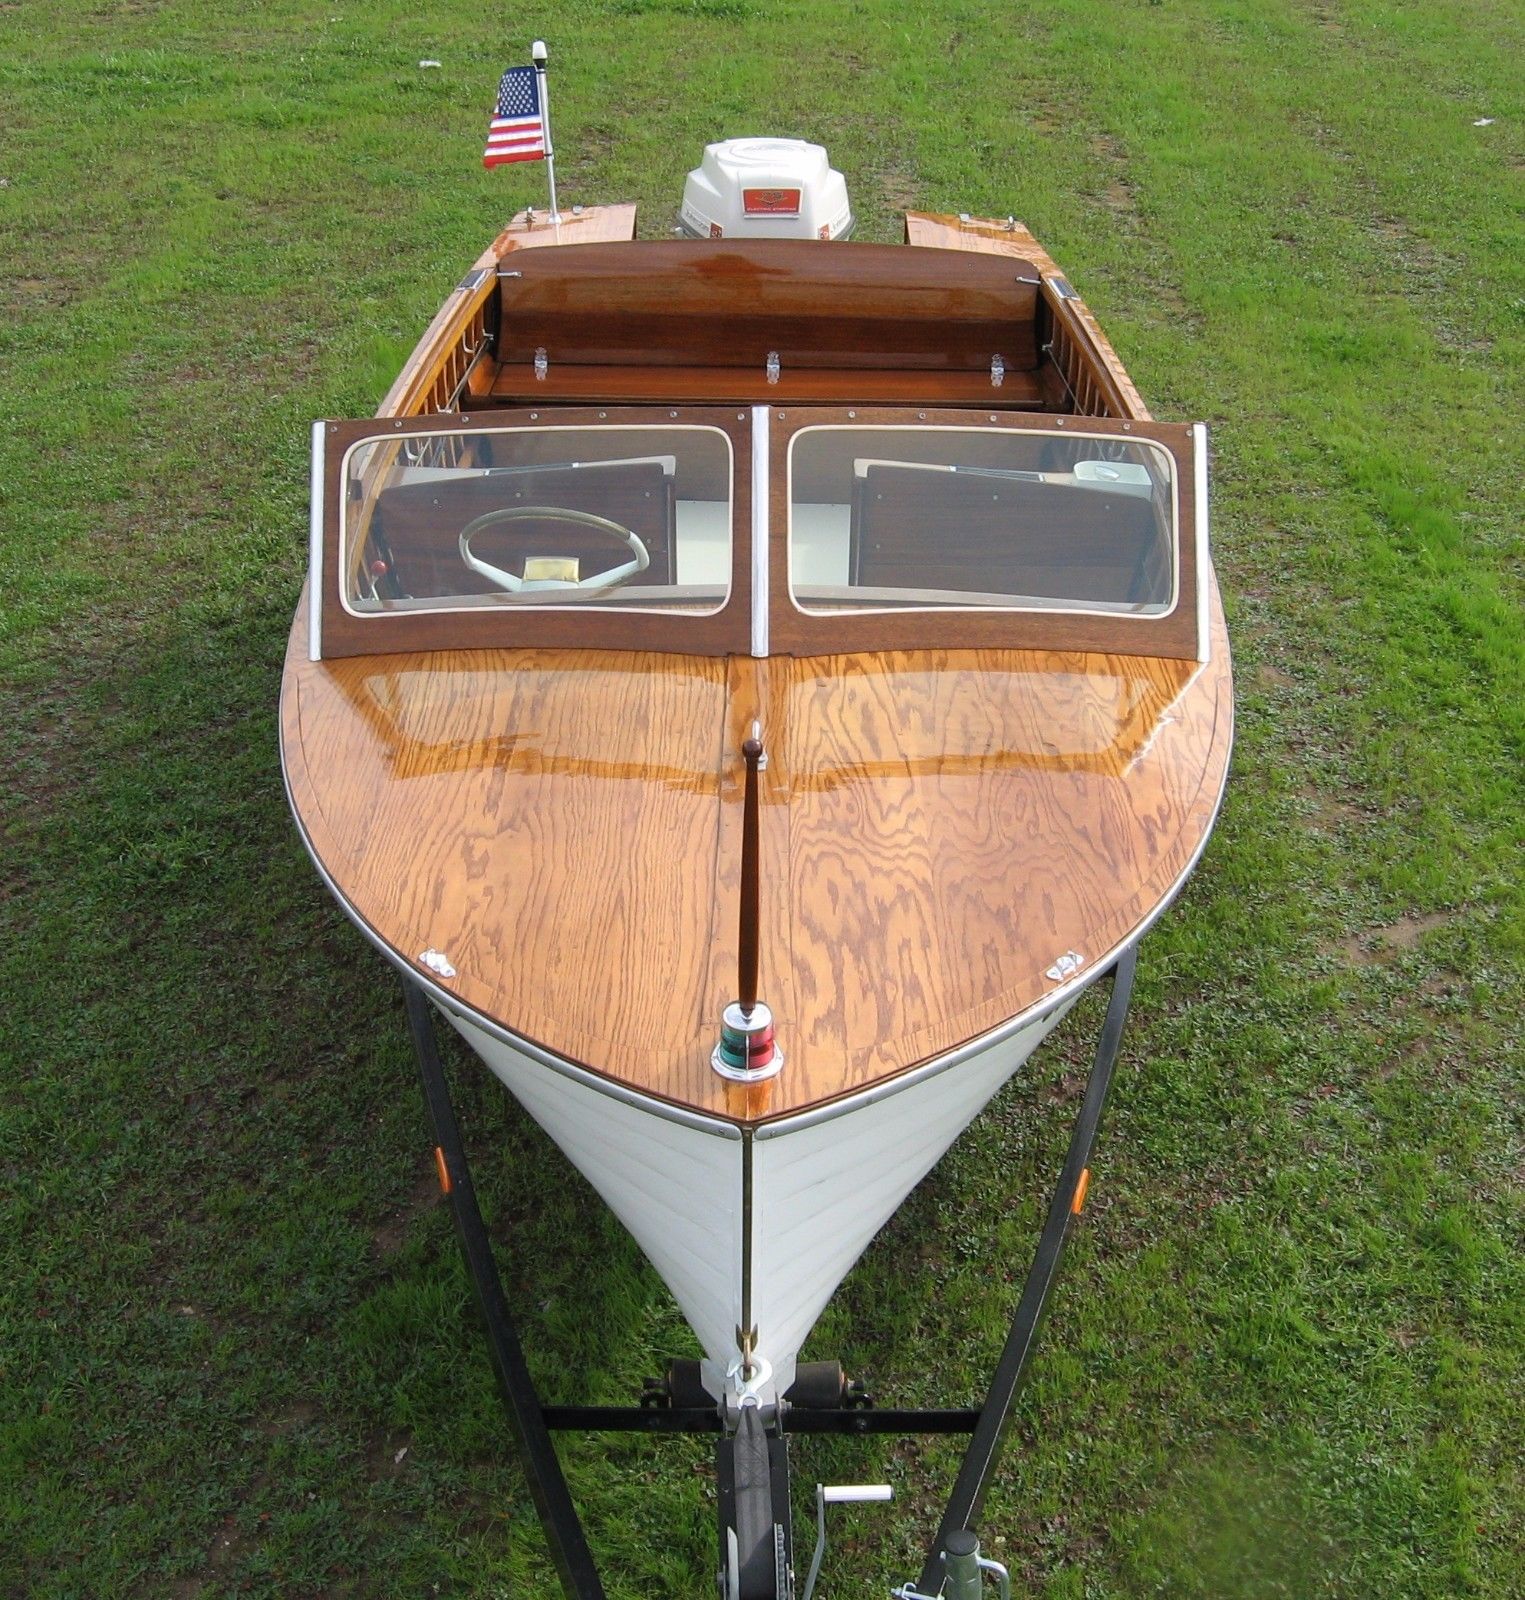 Lyman Outboard Runabout 1960 for sale for $3,000 - Boats-from-USA.com